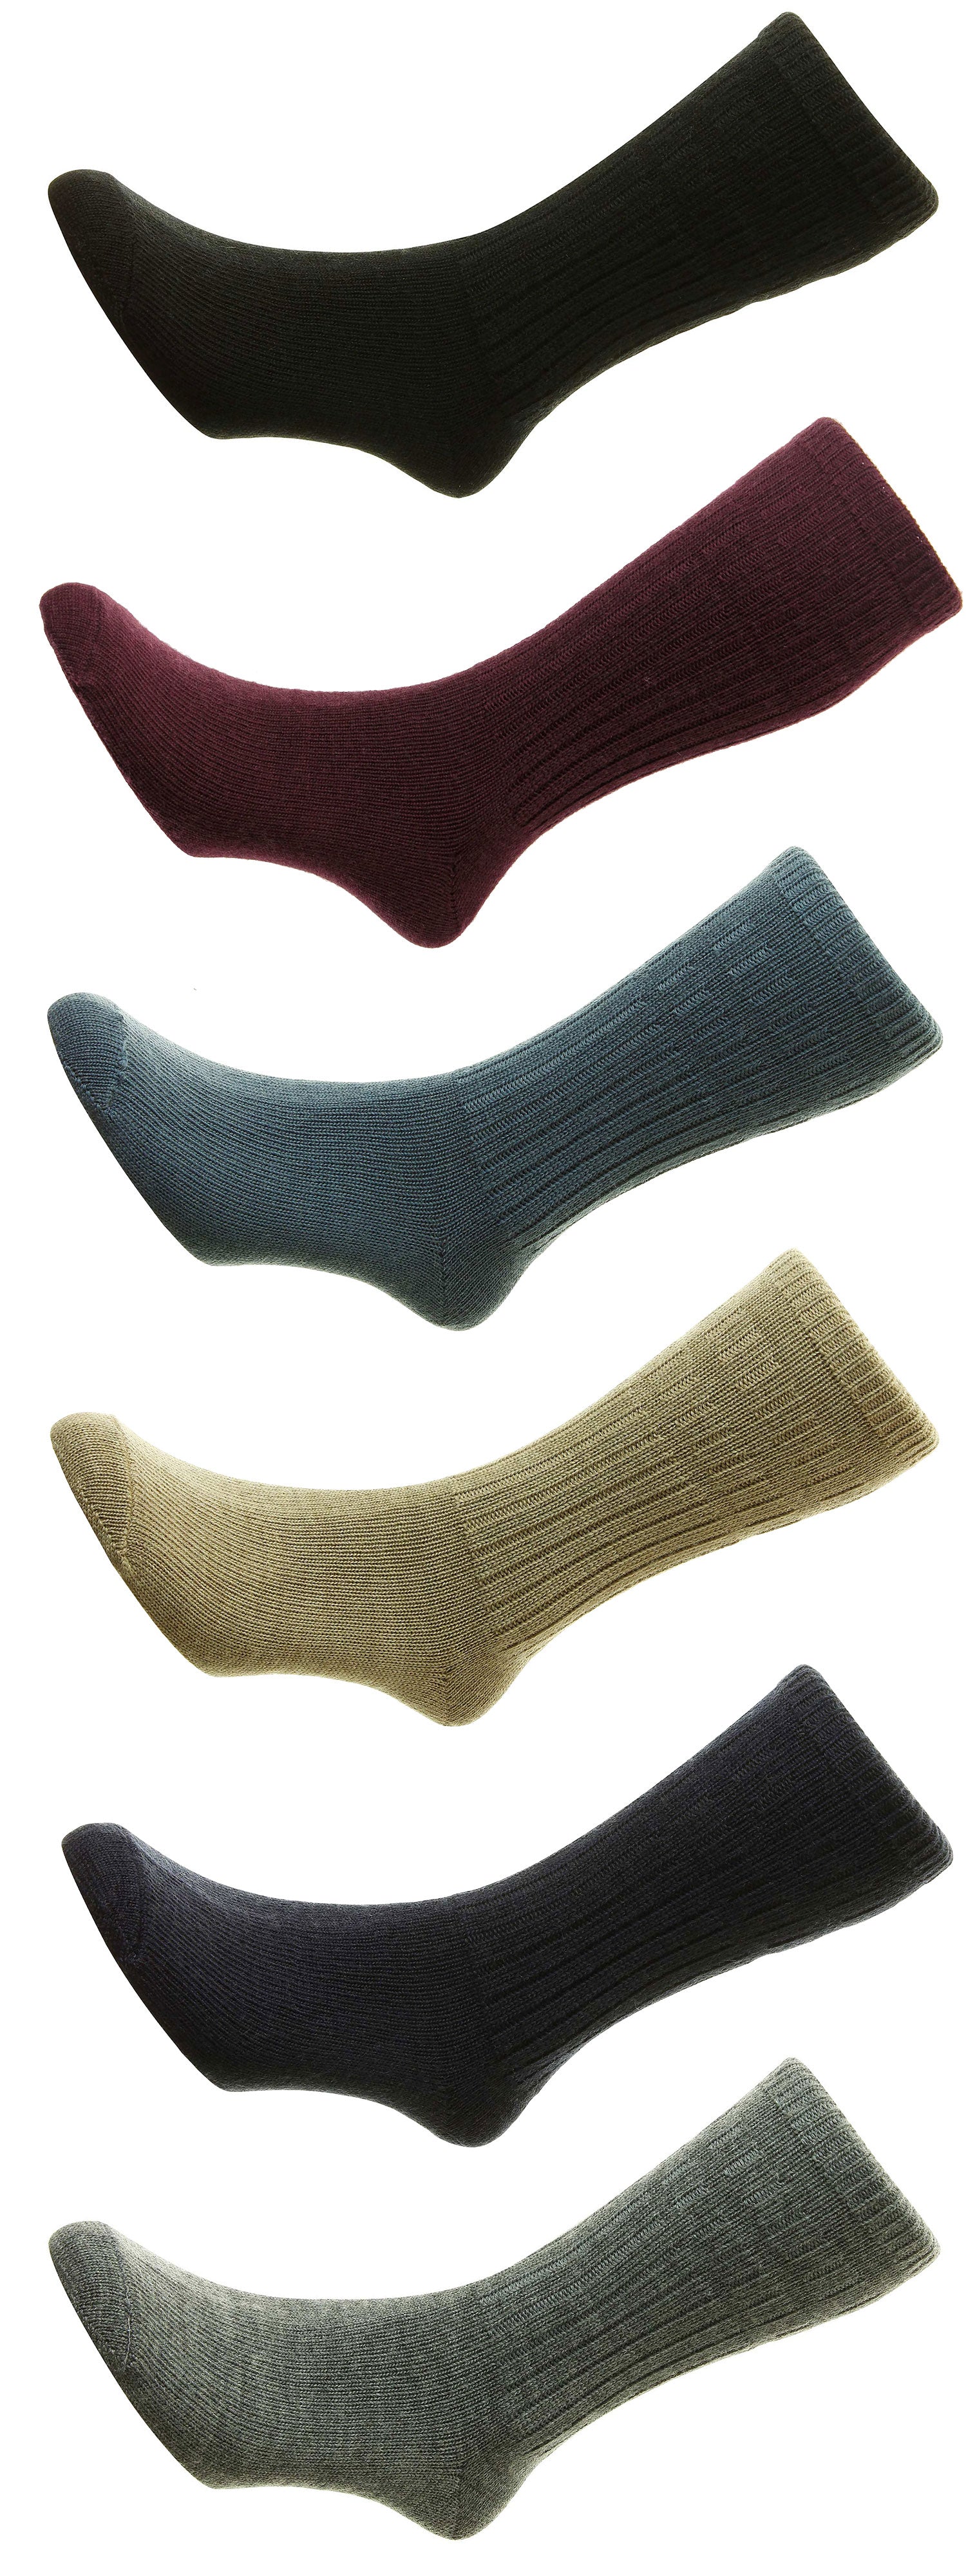 HJ Hall Thermal SoftTop Socks | Wool Rich - Hollands Country Clothing